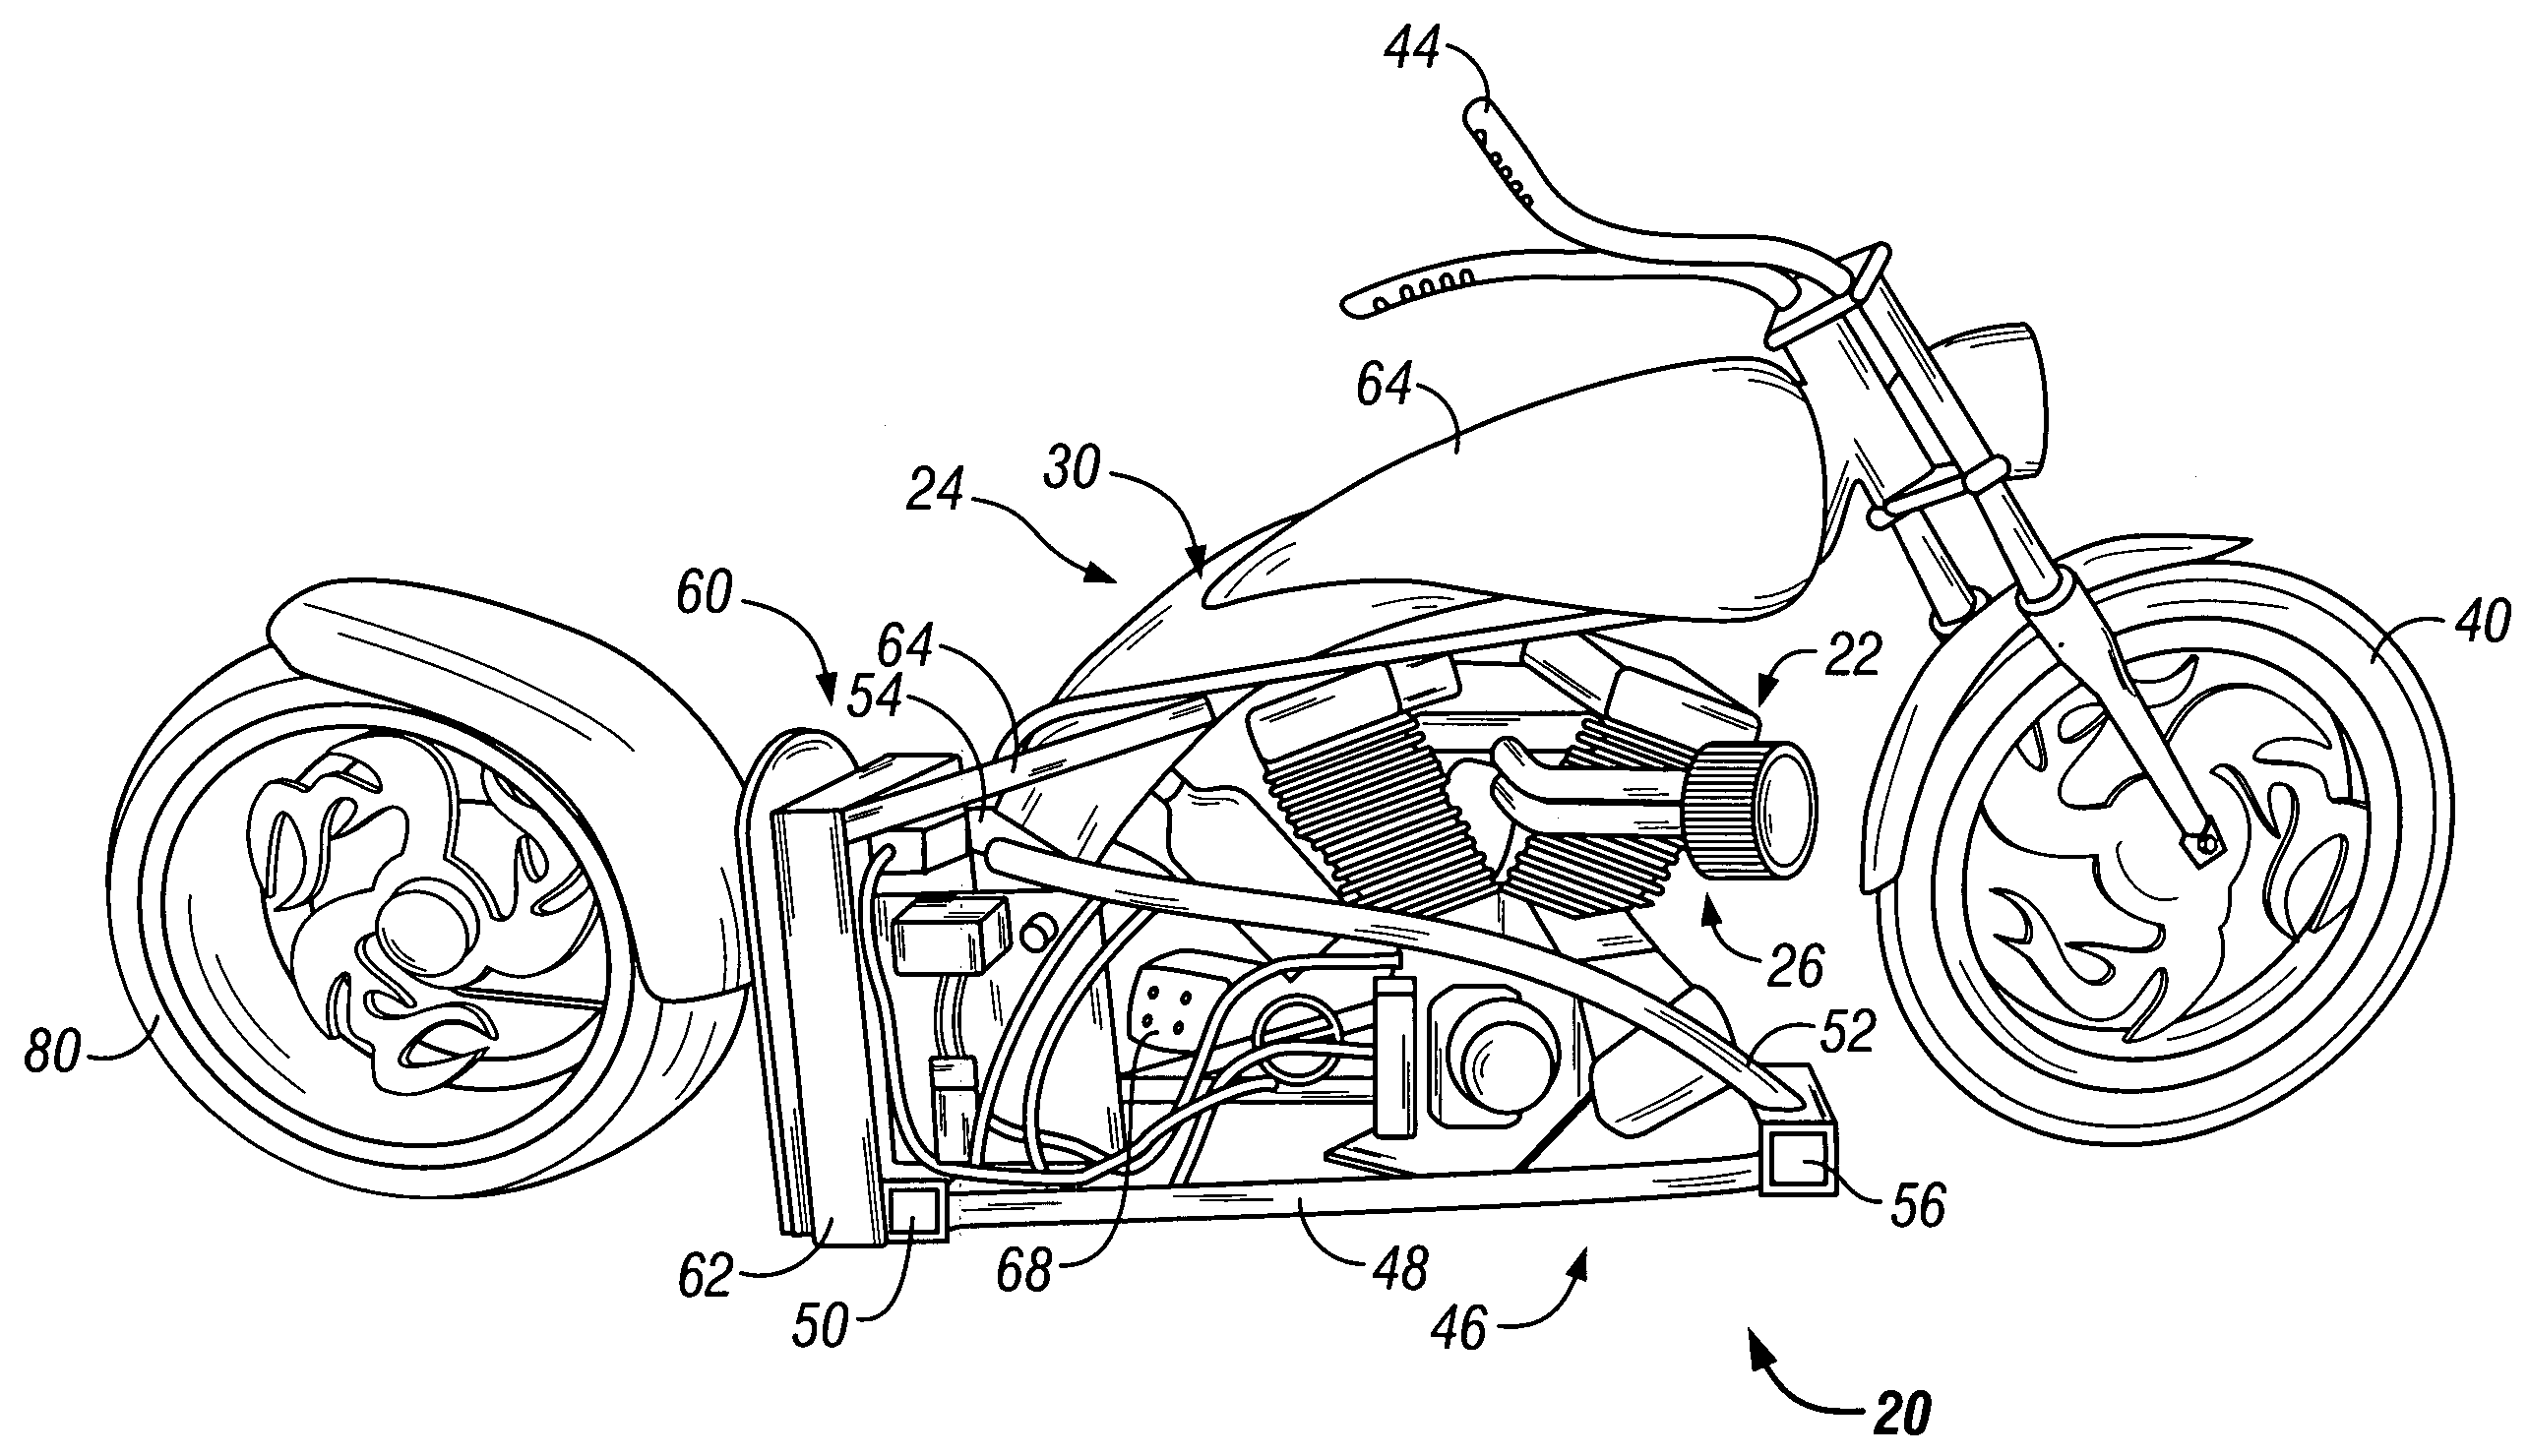 Motorcycle including a unique frame and drive unit